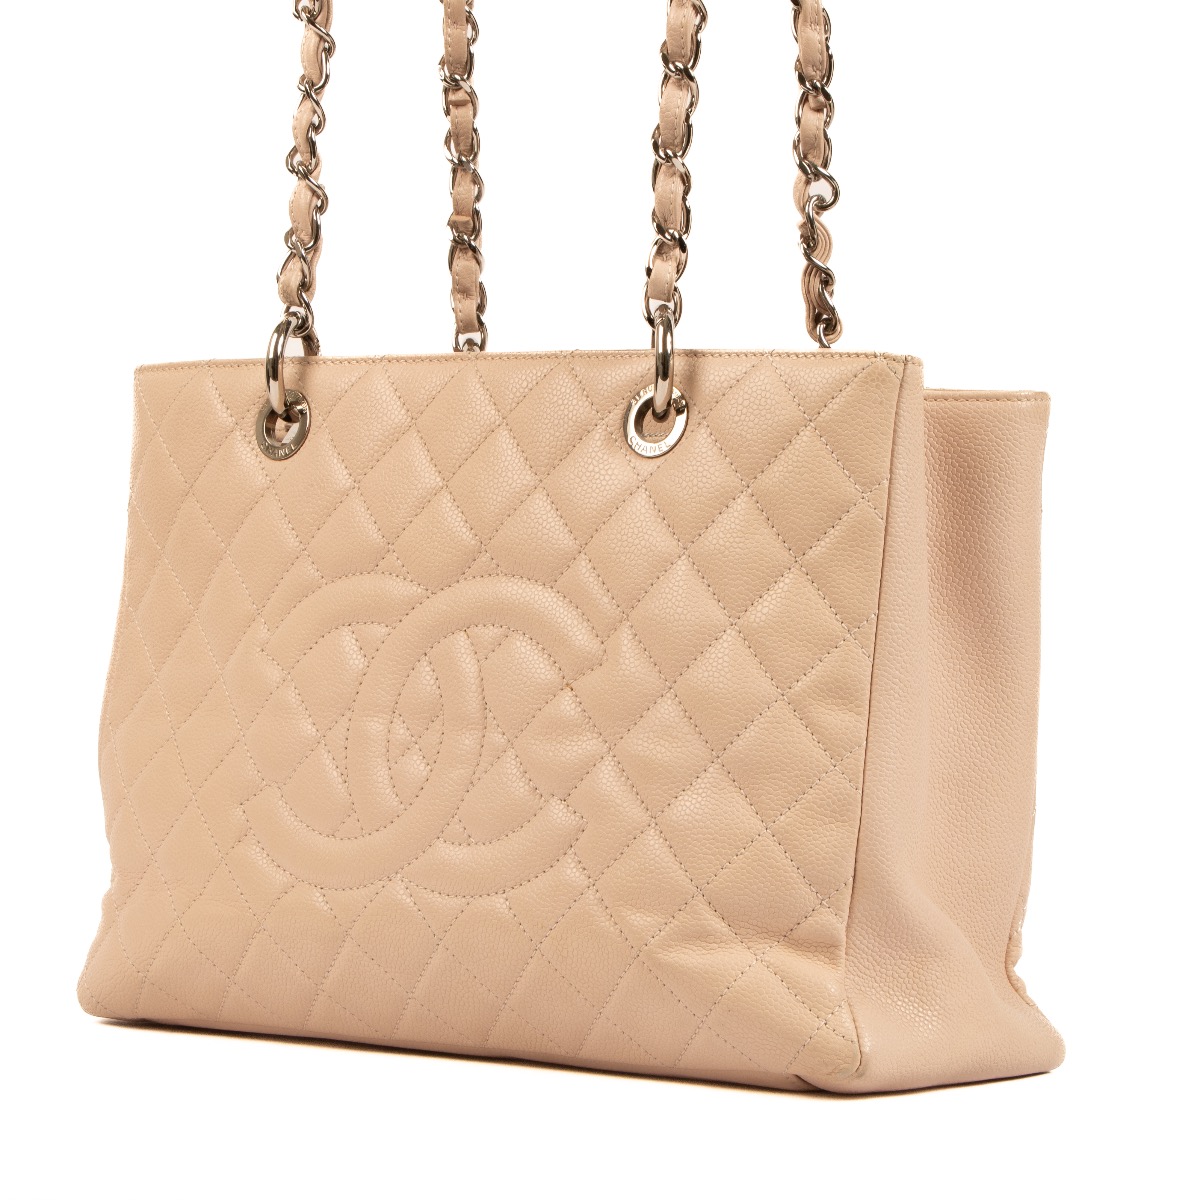 Chanel Metallic Pink Cracked Calfskin Leather Modern Chain Large Tote Bag  Chanel | The Luxury Closet